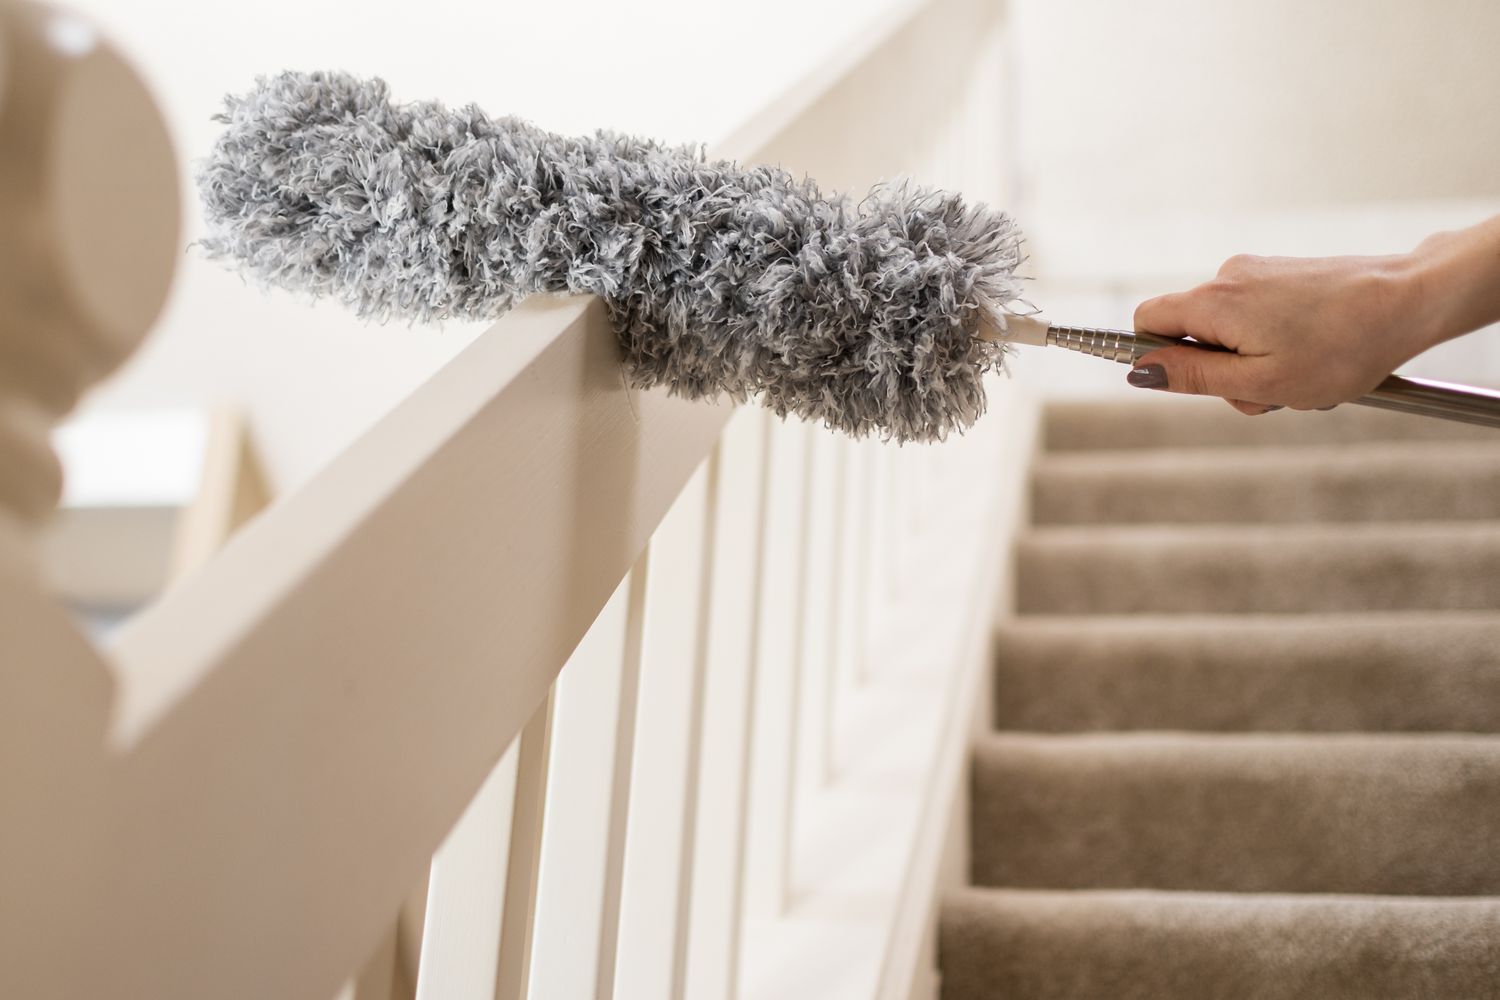 Long duster wiping staircase banister